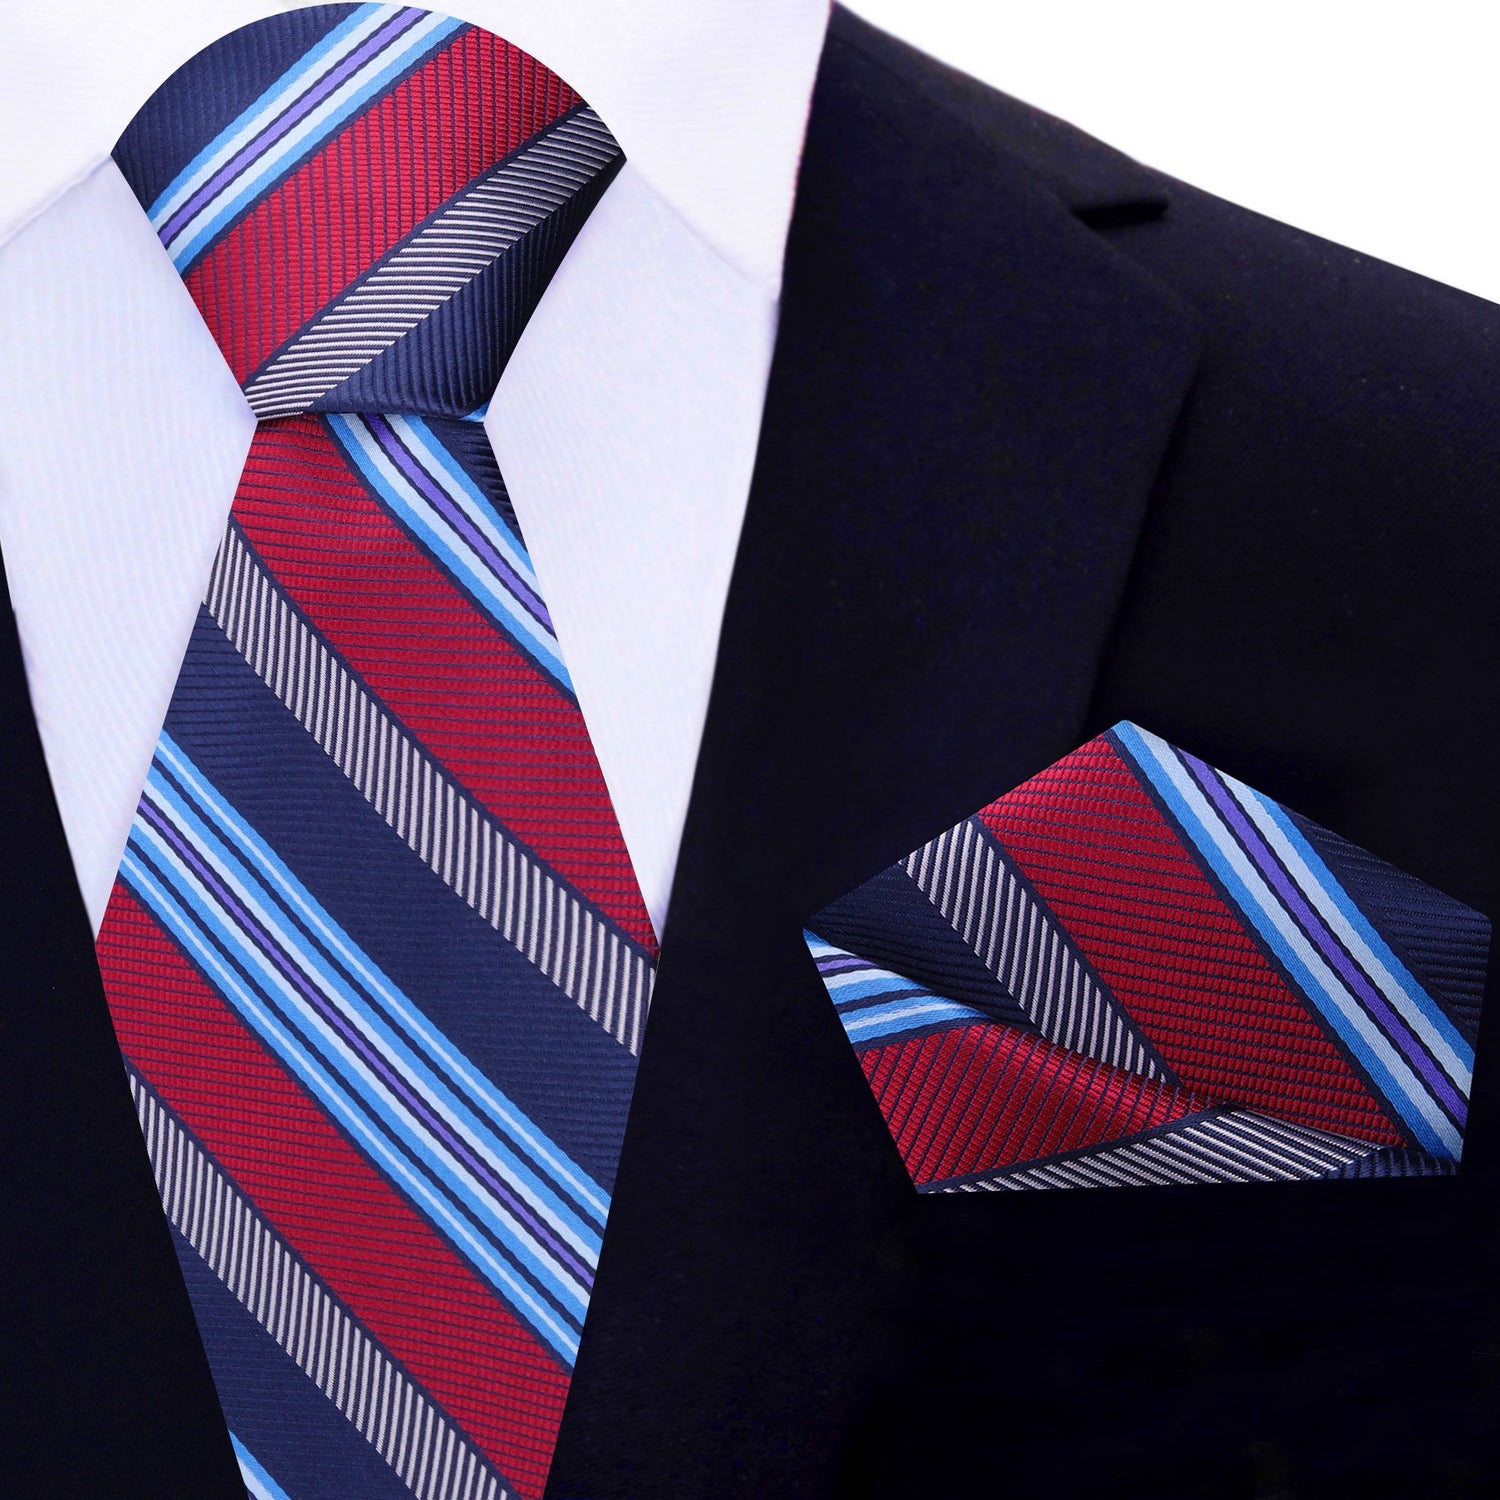 Main View: Blue, Light Blue, Red Stripe Tie and Pocket Square